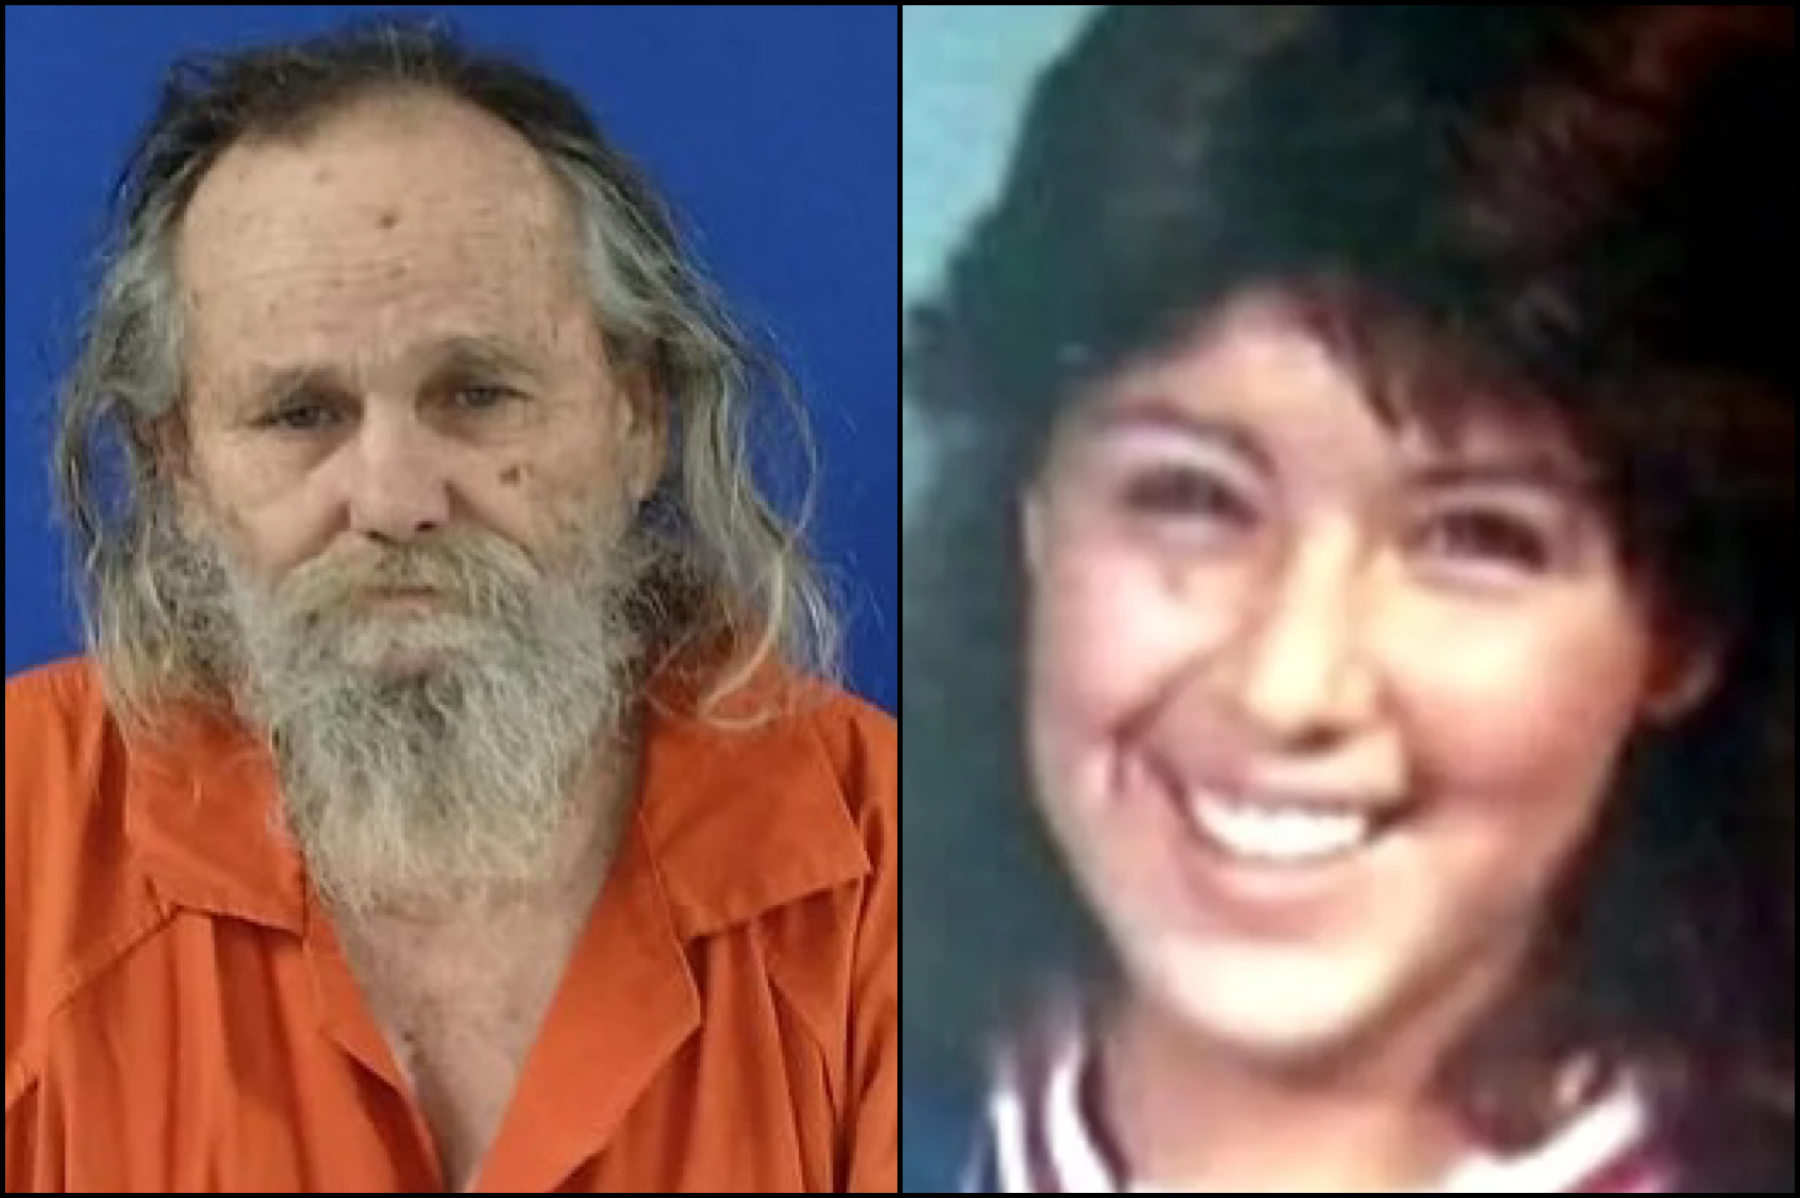 Raymond Lewis Stafford, 70, was arrested nearly 40 years after Susan Robin Bender, 15, vanished from a Modesto Greyhound station in 1986